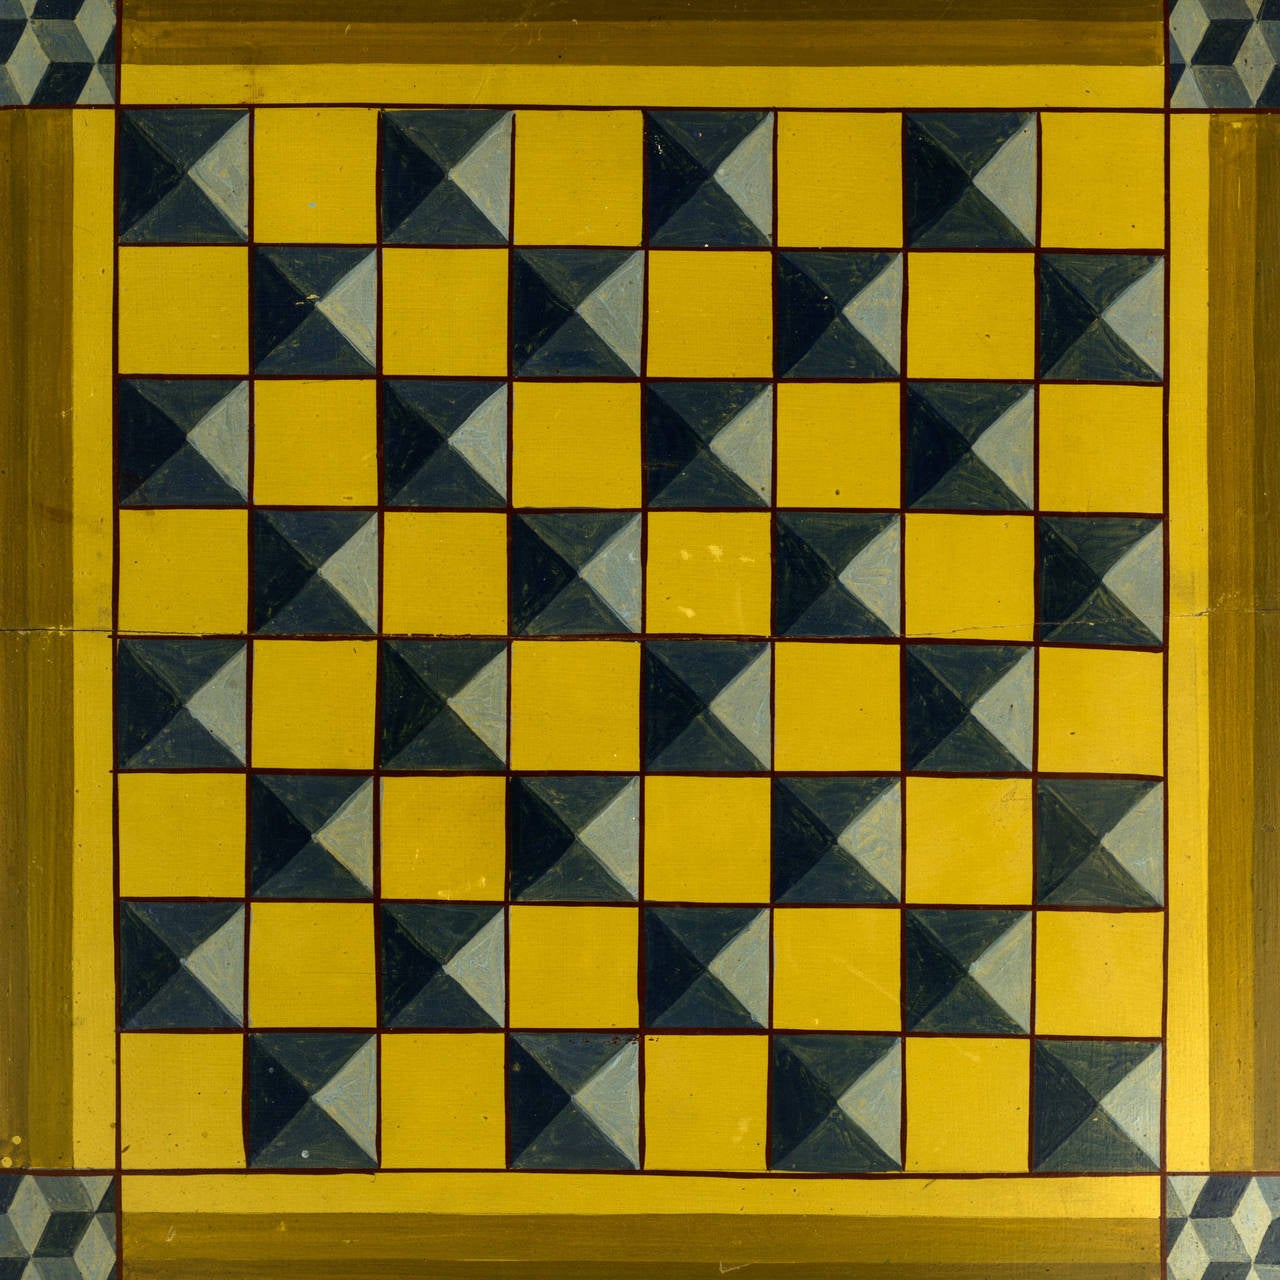 Paint decorated game board, one side a Parchessi board with yellow ground, silver and gold highlight leafing and interesting tumbling corner blocks, the other side a checkerboard in blue and gray checker squares.
Great original condition with